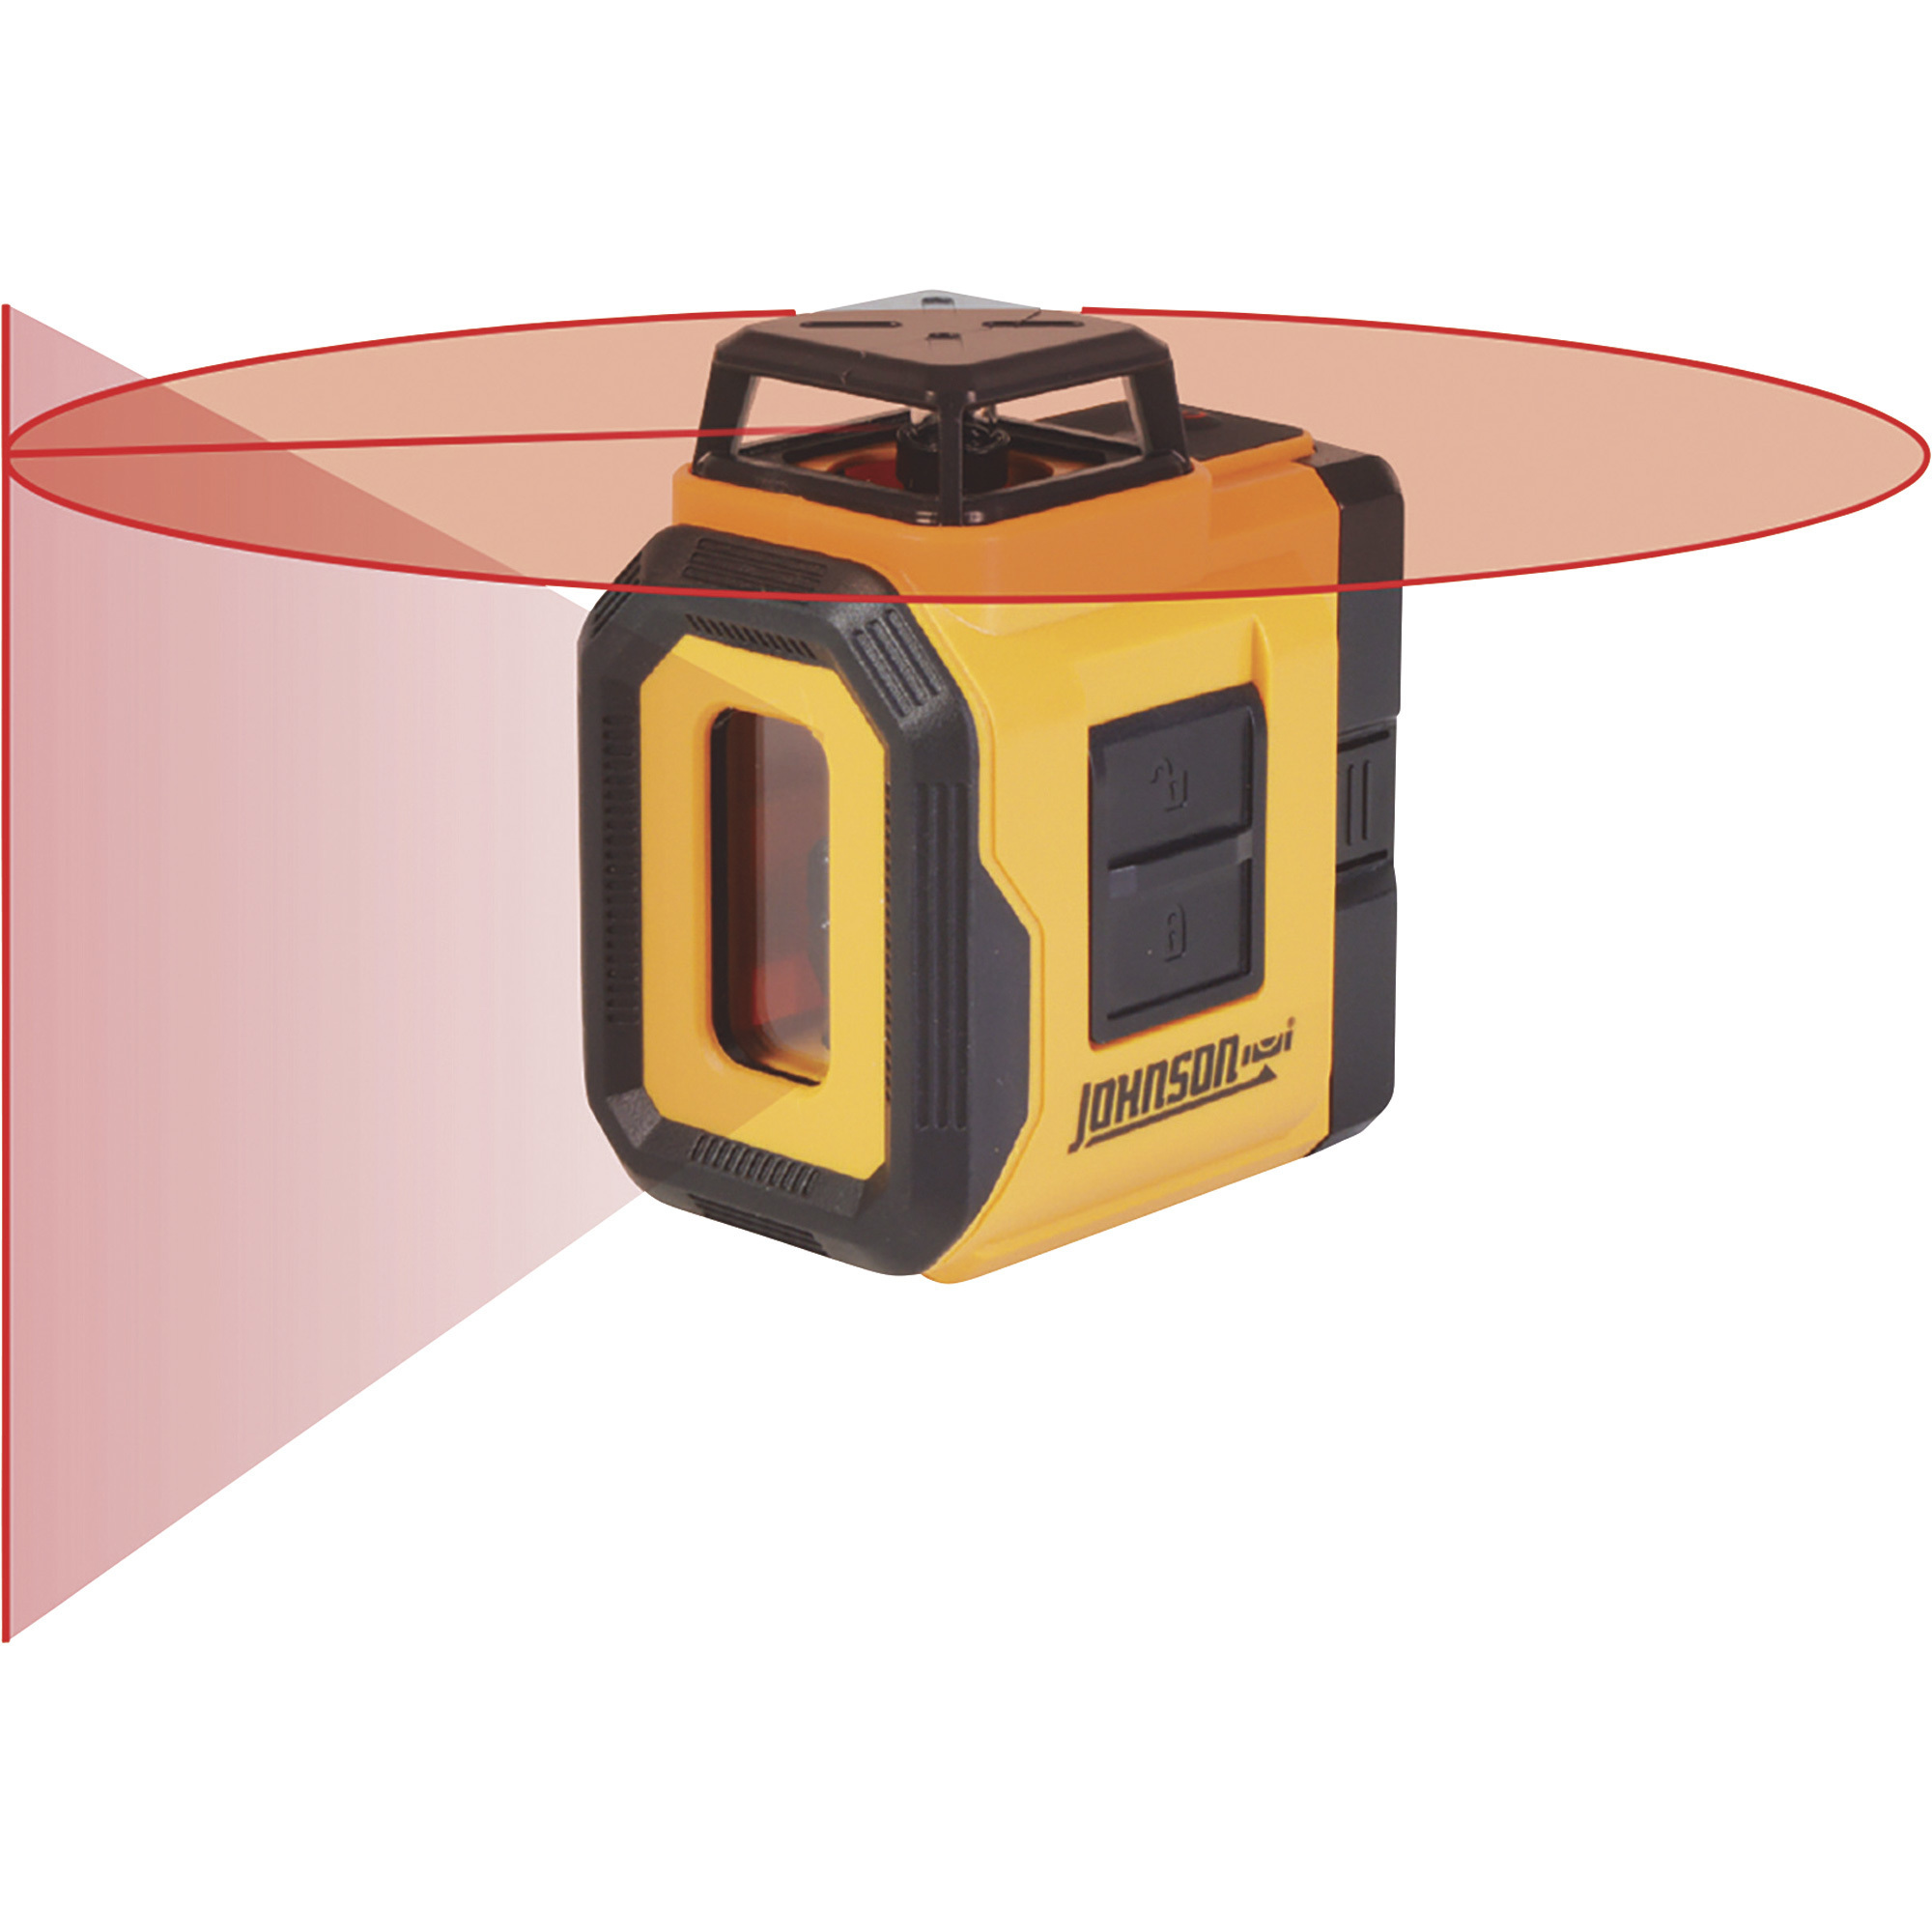 Laser Level Kit Class Laser Ⅱ,Self-Leveling laser Cross Level,Horizontal  and Vertical Points Rotatable 360 Degree Suitable for interior